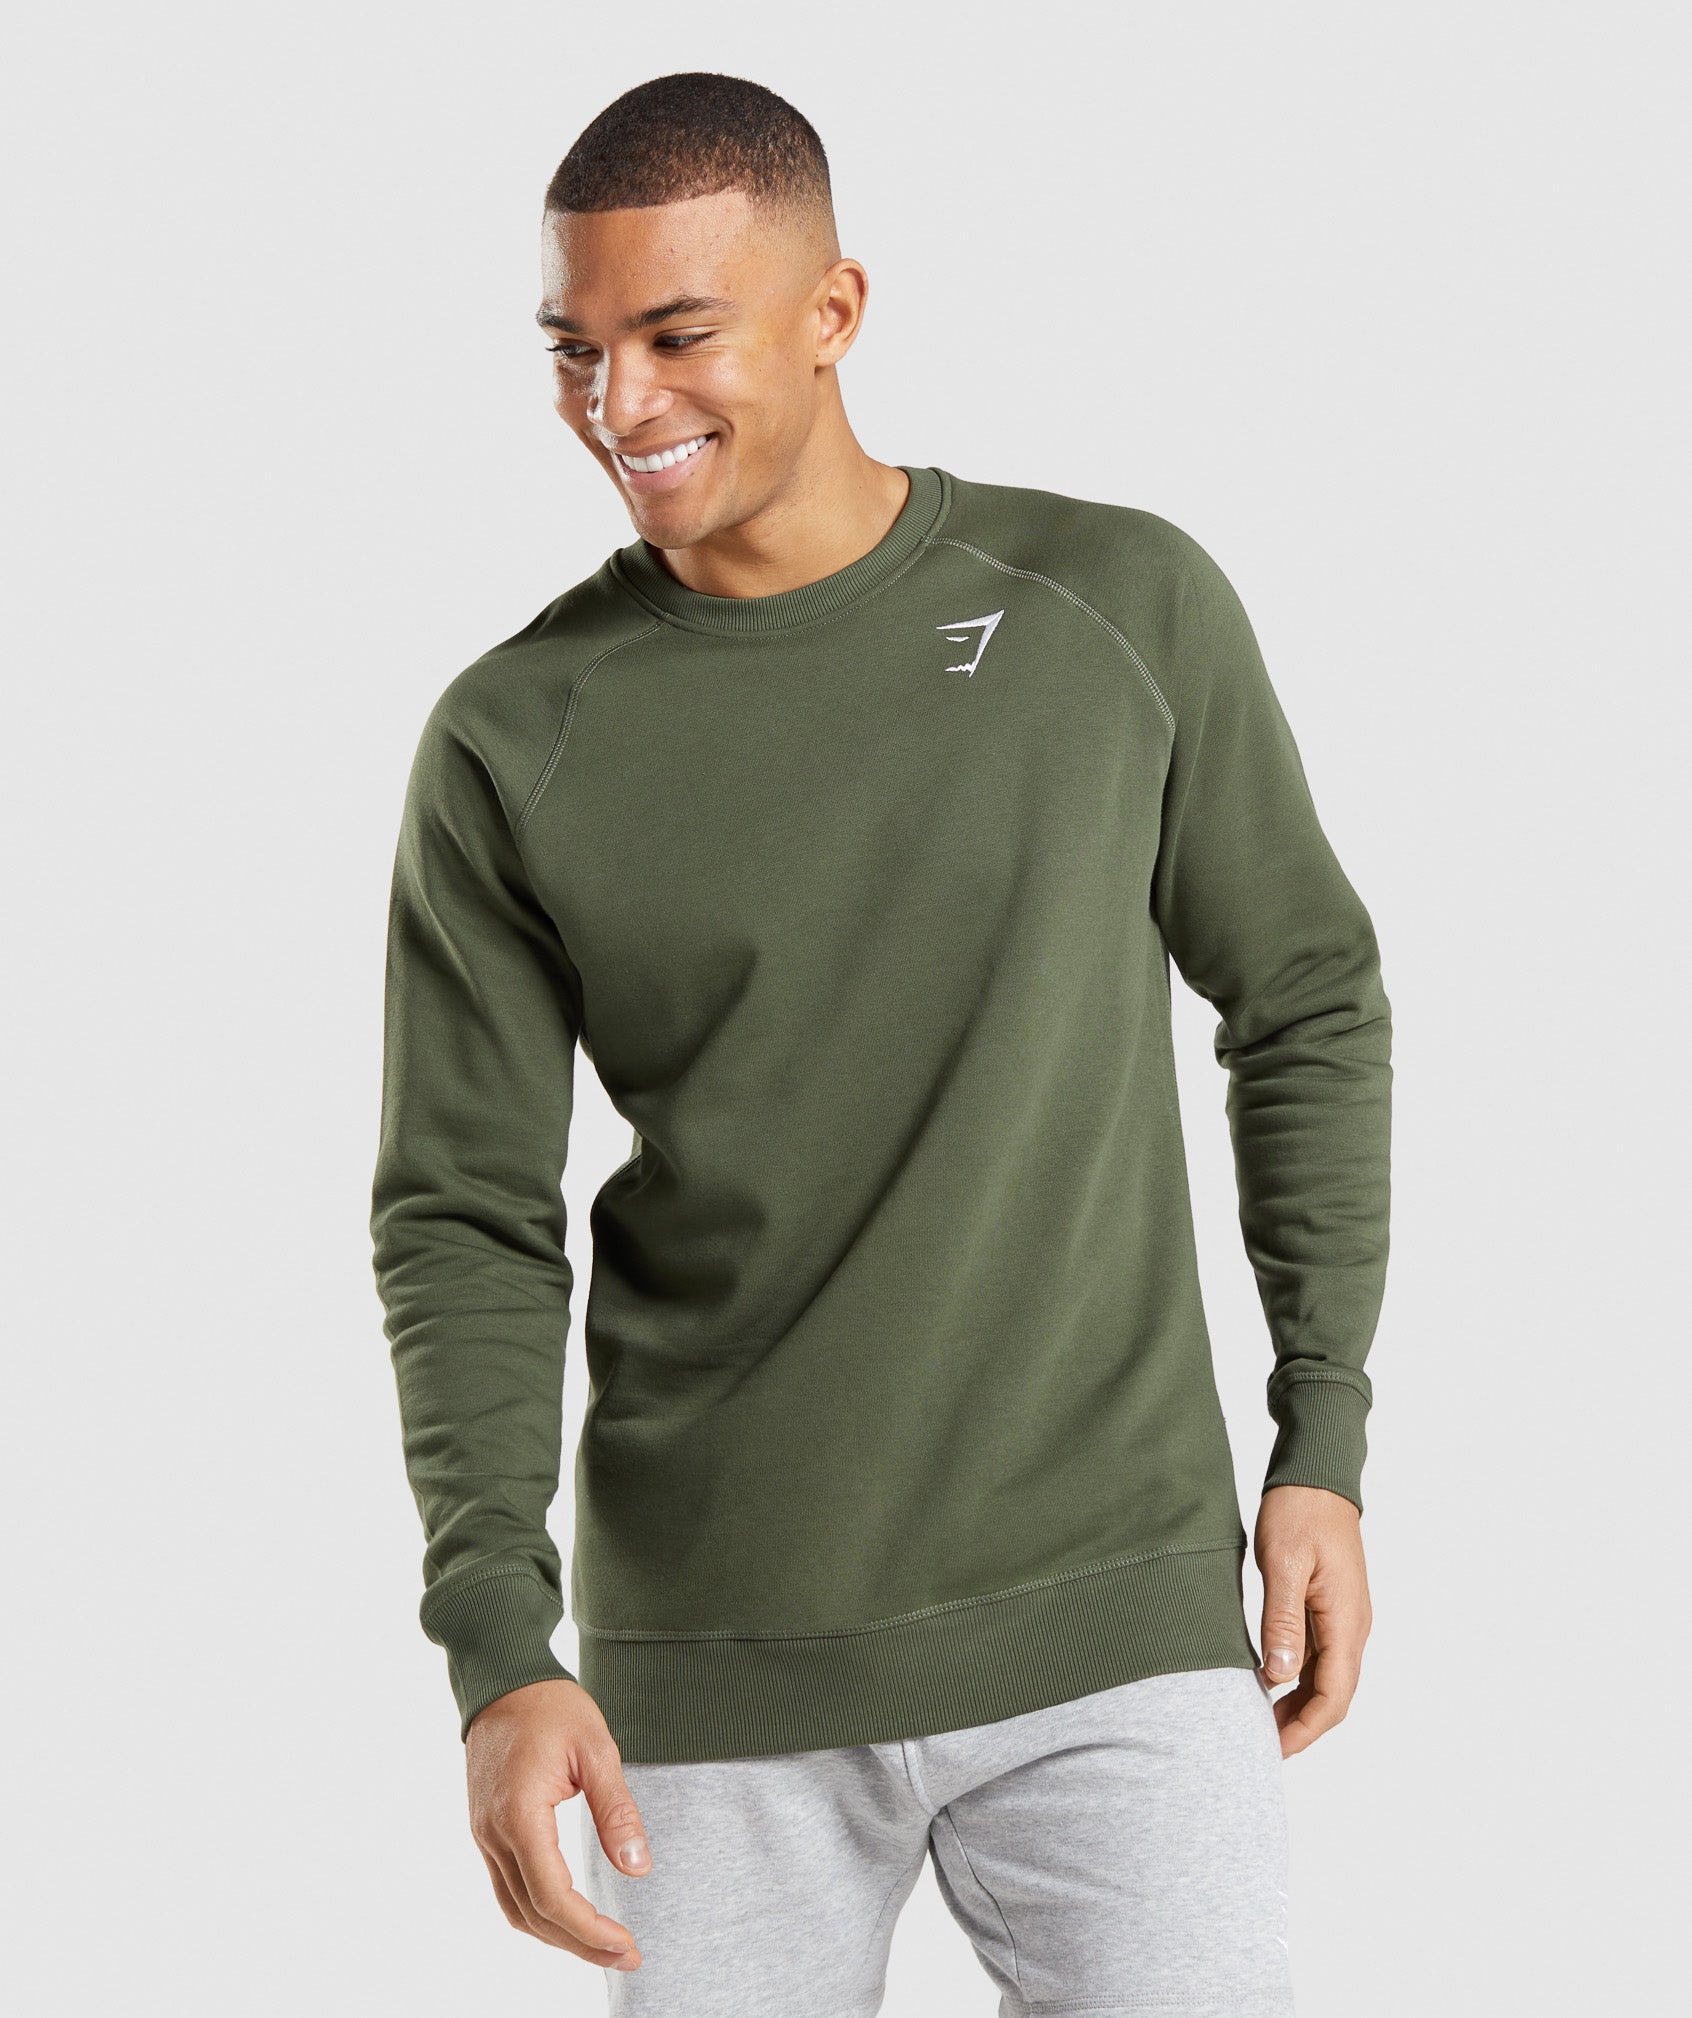 Crest Sweatshirt in Core Olive is out of stock